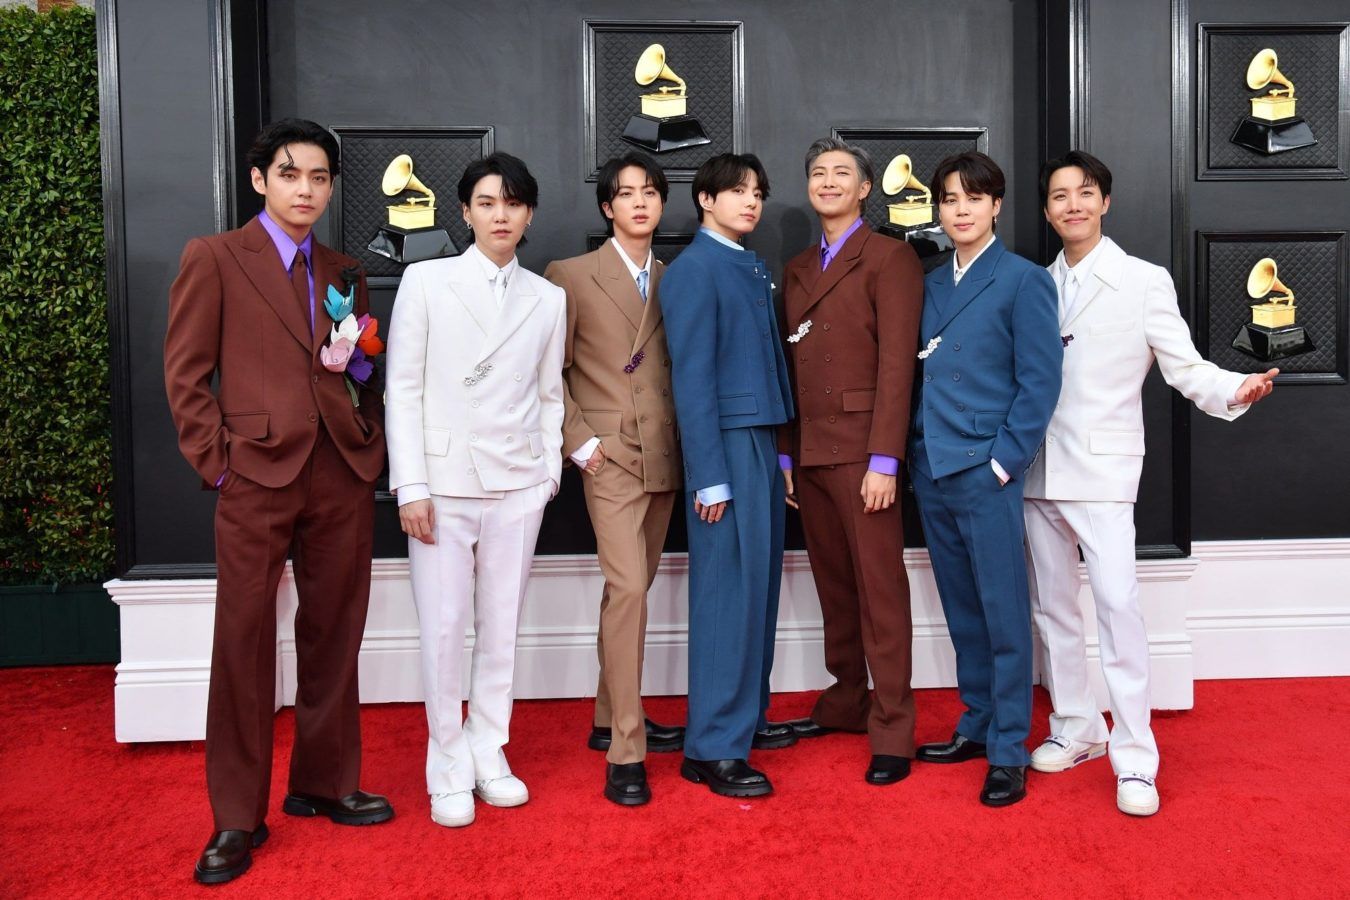 Grammys 2022: All the best-dressed stars on the red carpet